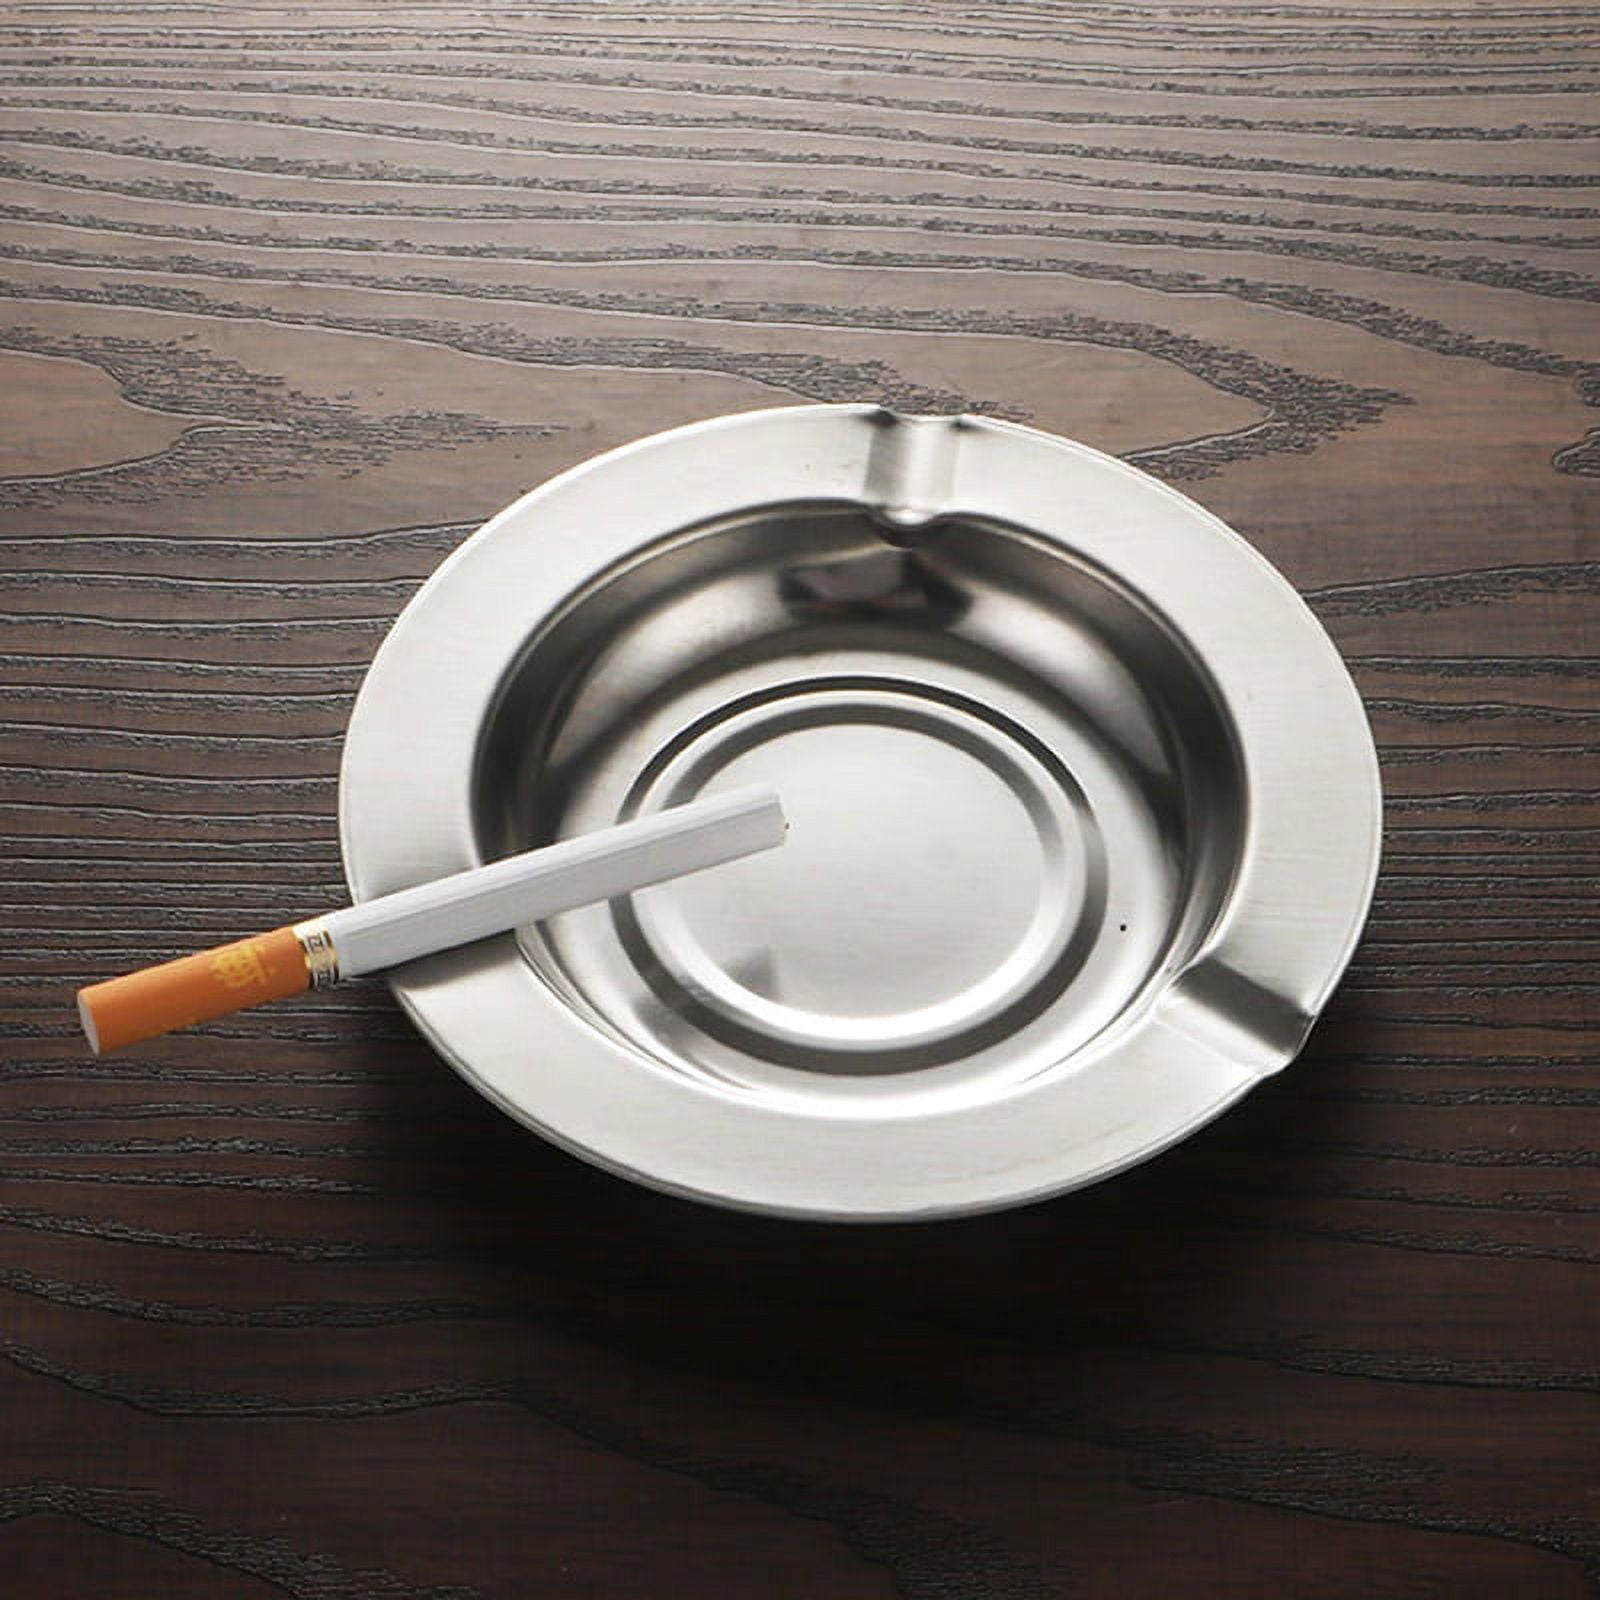 Silver Round Ashtray Large Simple Basic Stainless Steel Metal Portable  Short Low 